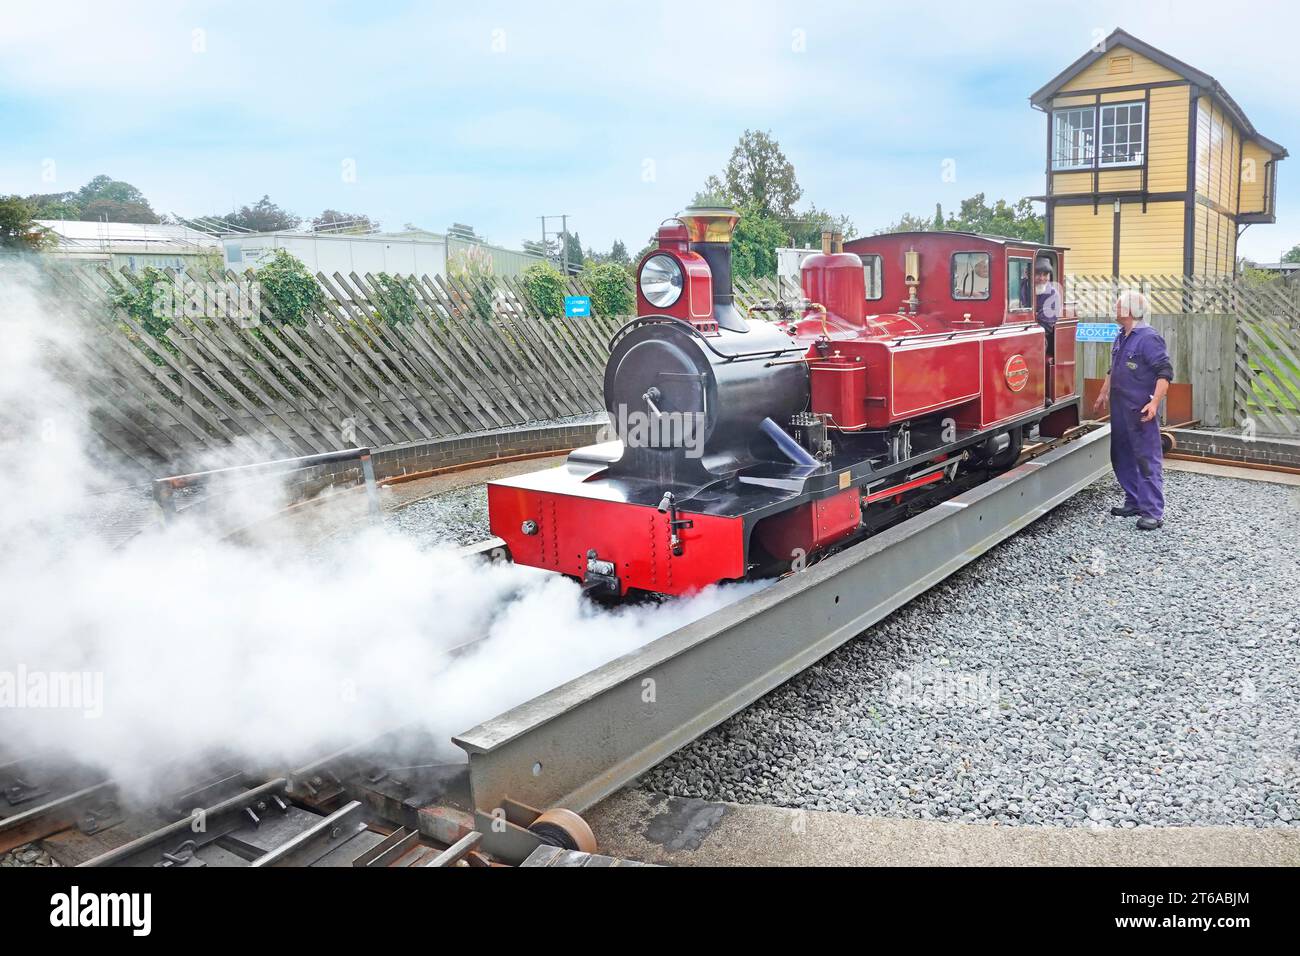 Bure Valley narrow gauge railway steam engine 'Mark Timothy' & crew at turntable in Wroxham terminal station with main line signal box  England UK Stock Photo